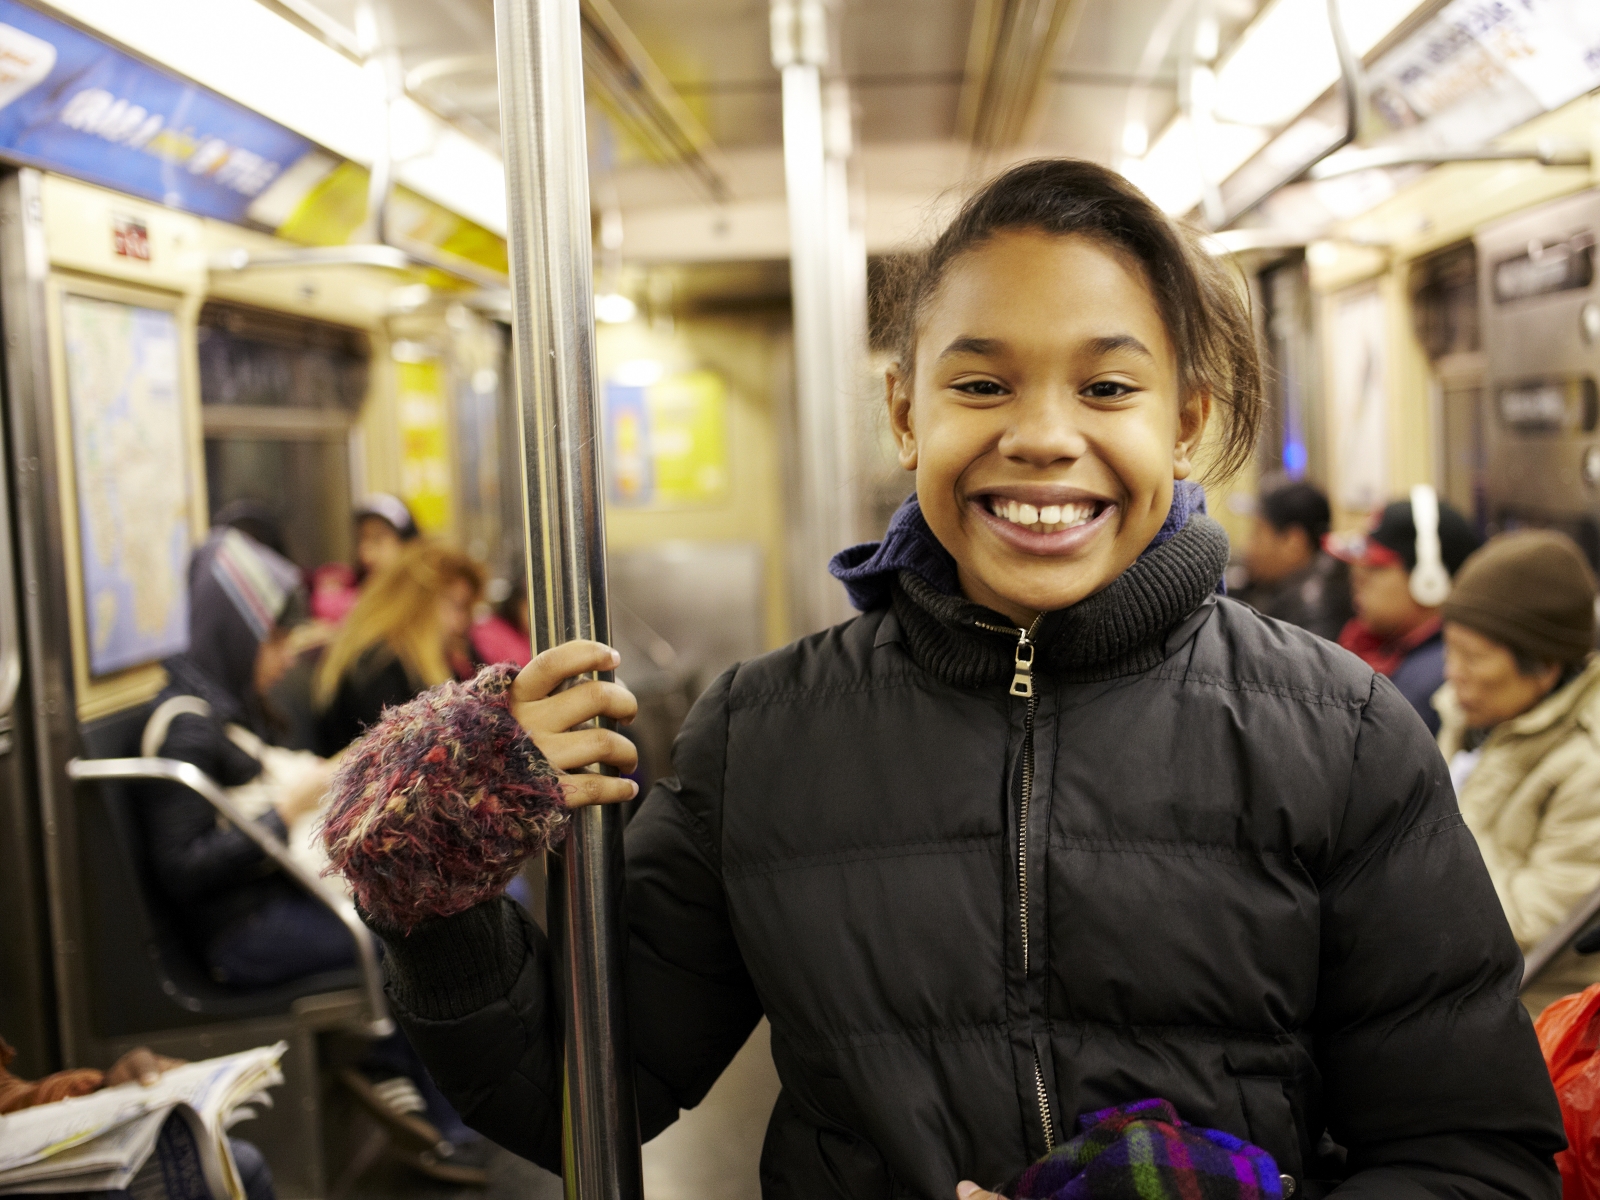 image of kids ride the subway alone